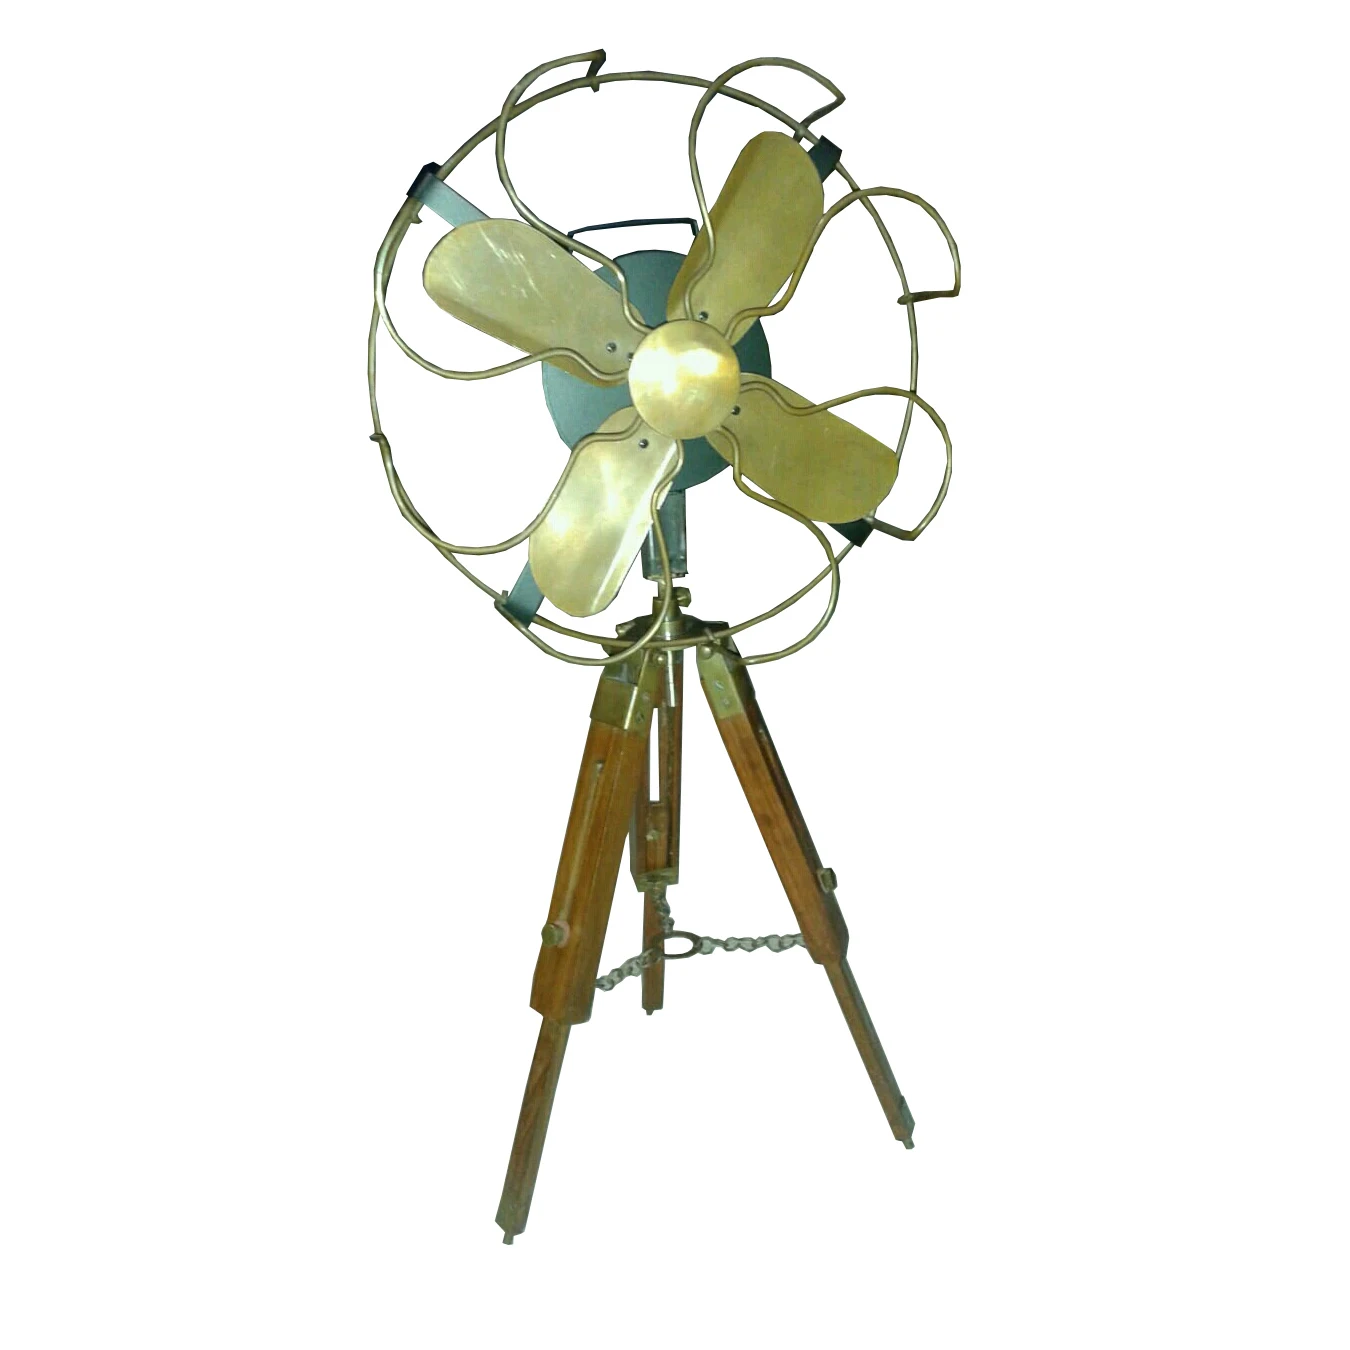 High Demanding Classical Vintage Electric Fan With Tripod Stand 4 Metal Blades And Cage Antique Decorative Fans Wholesale Buy High Demanding Classical Vintage Electric Fan With Tripod Stand 4 Metal Blades